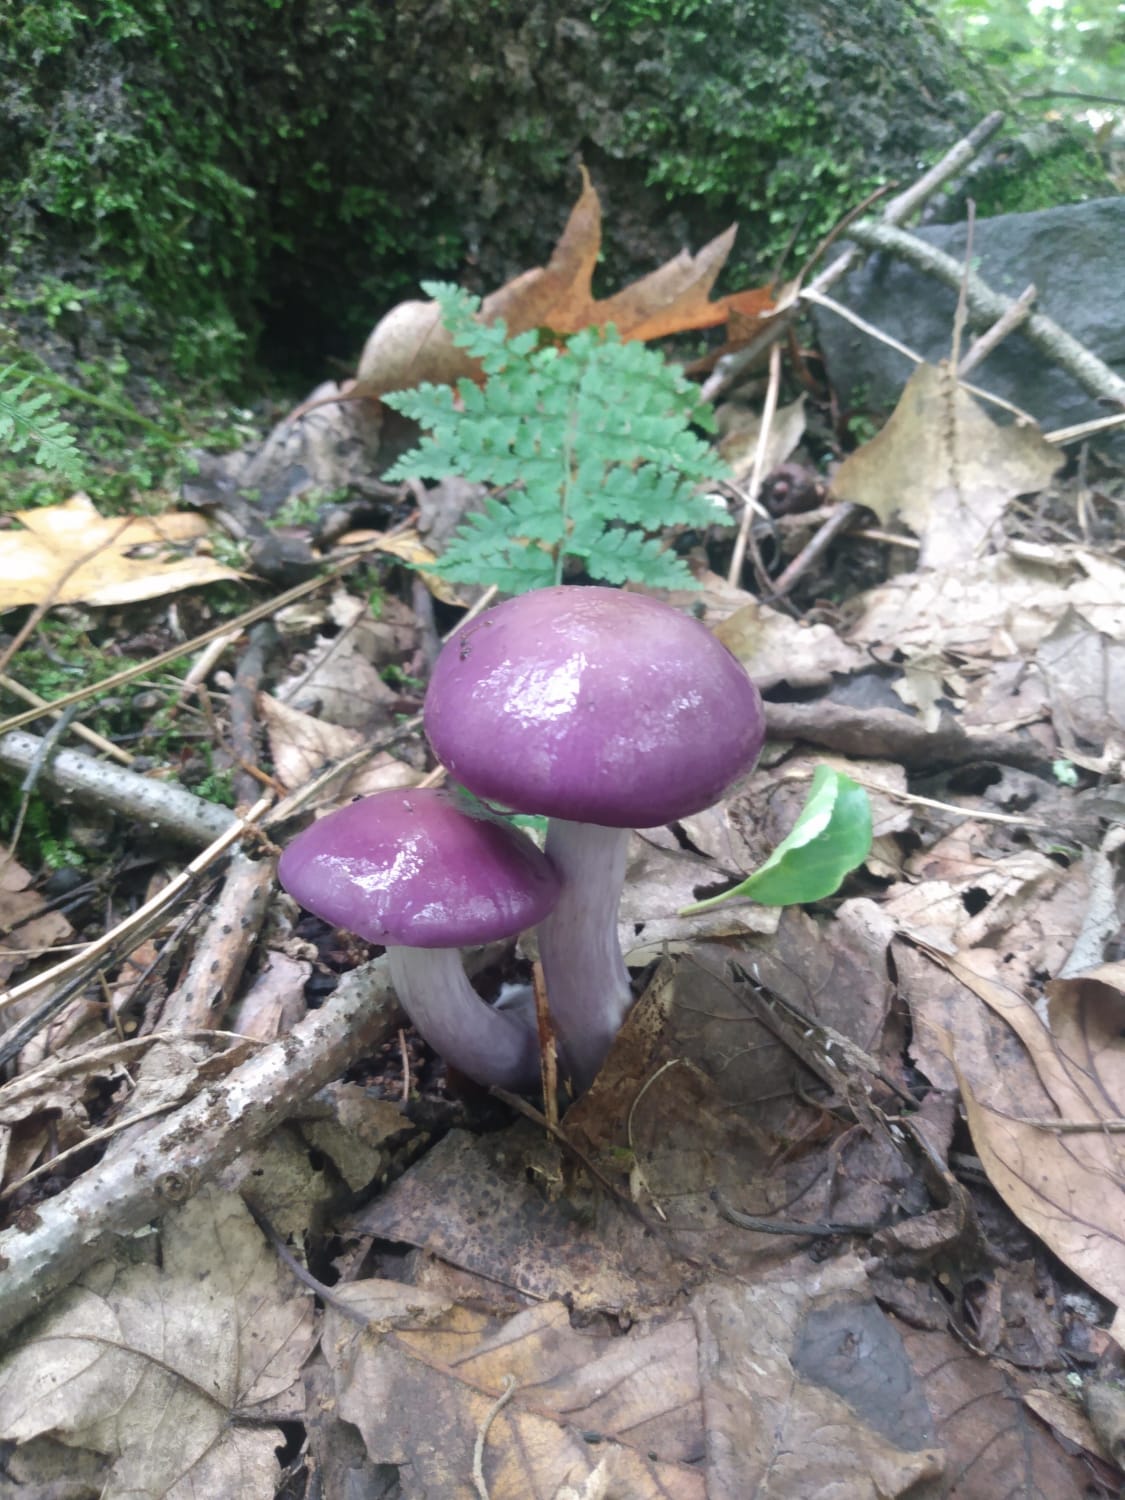 Just south of Duncannon, PA on the Appalachian Trail. So many beautiful shrooms out here today!